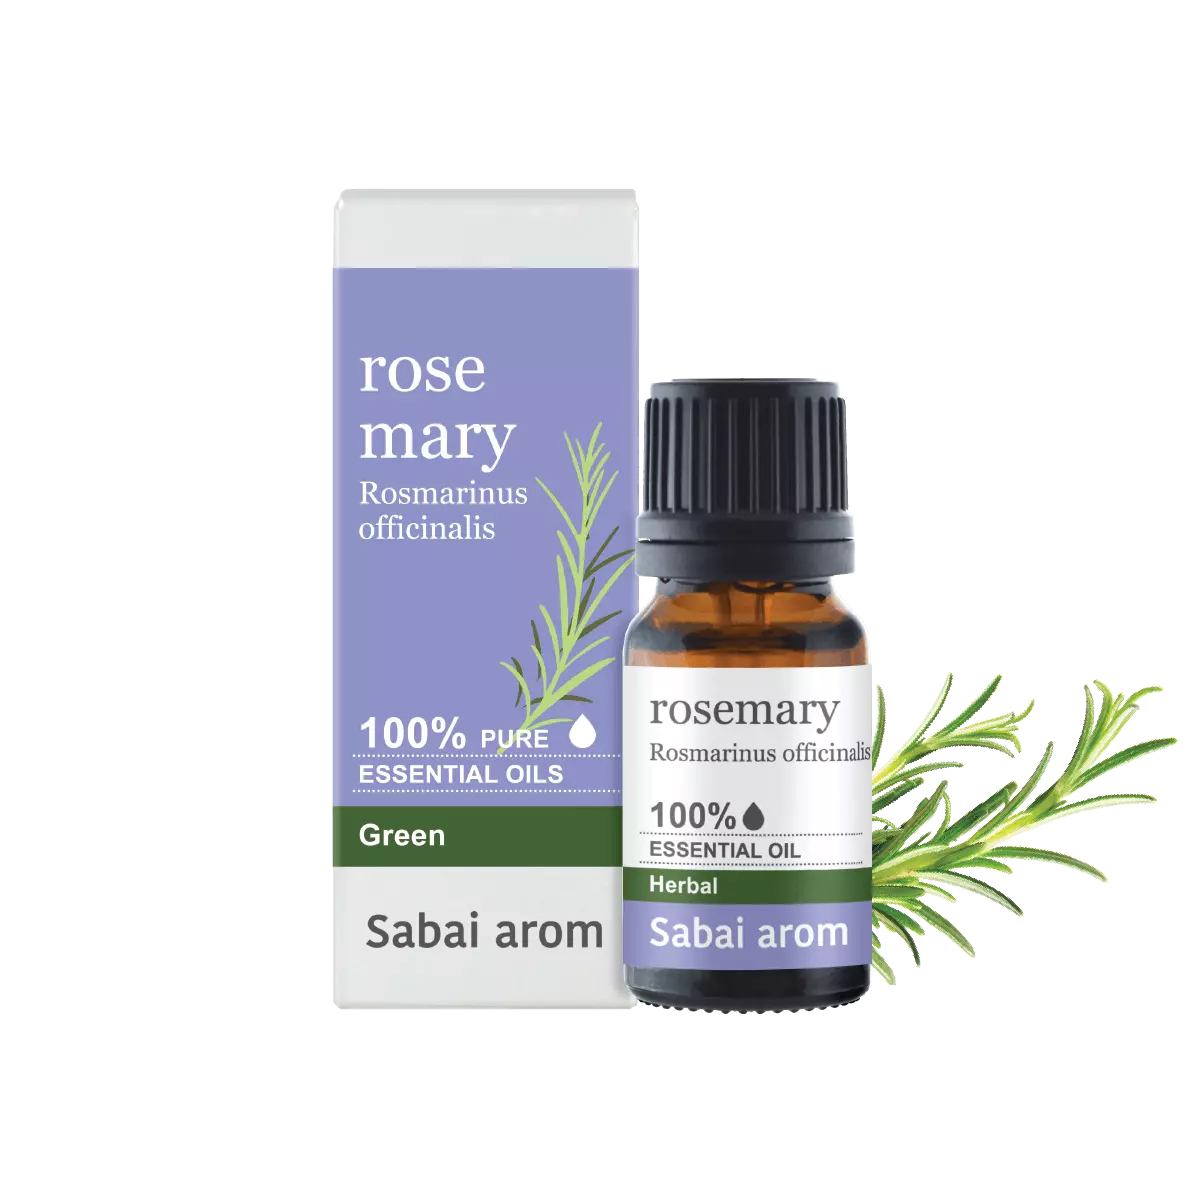 essential oil rosemary <h2>100% Pure Essential Oil</h2> <em><strong>Rosmarinus Officinalis Ct.verbenone</strong></em> <strong>Source : </strong>France In ancient Greek, Roman, Egyptian and Hebrew civilizations, Rosemary, a fragrant herb in the same family as Lavender and Sage, was bound to people in almost every aspect of life; from religion to festival, culinary and aromatherapy. It imparts a wonderful aroma of being pungent, camphorous, woody, refreshing and stimulating all in one. The sensorial effect of Rosemary strengthens our memory and supports our clear thinking. Thus, it is the right essential oil that can be used as a student buddy. When mixed with carrier oil and applied topically, Rosemary essential oil relieves our abdominal pain effectively. It enhances our immune system and heals wounded skin. <strong>Scent : </strong>Strong penetrating, fresh, medicinal, herbal and slight sweet. <strong>Family : </strong>Fresh Herb <strong>Note : </strong>Middle